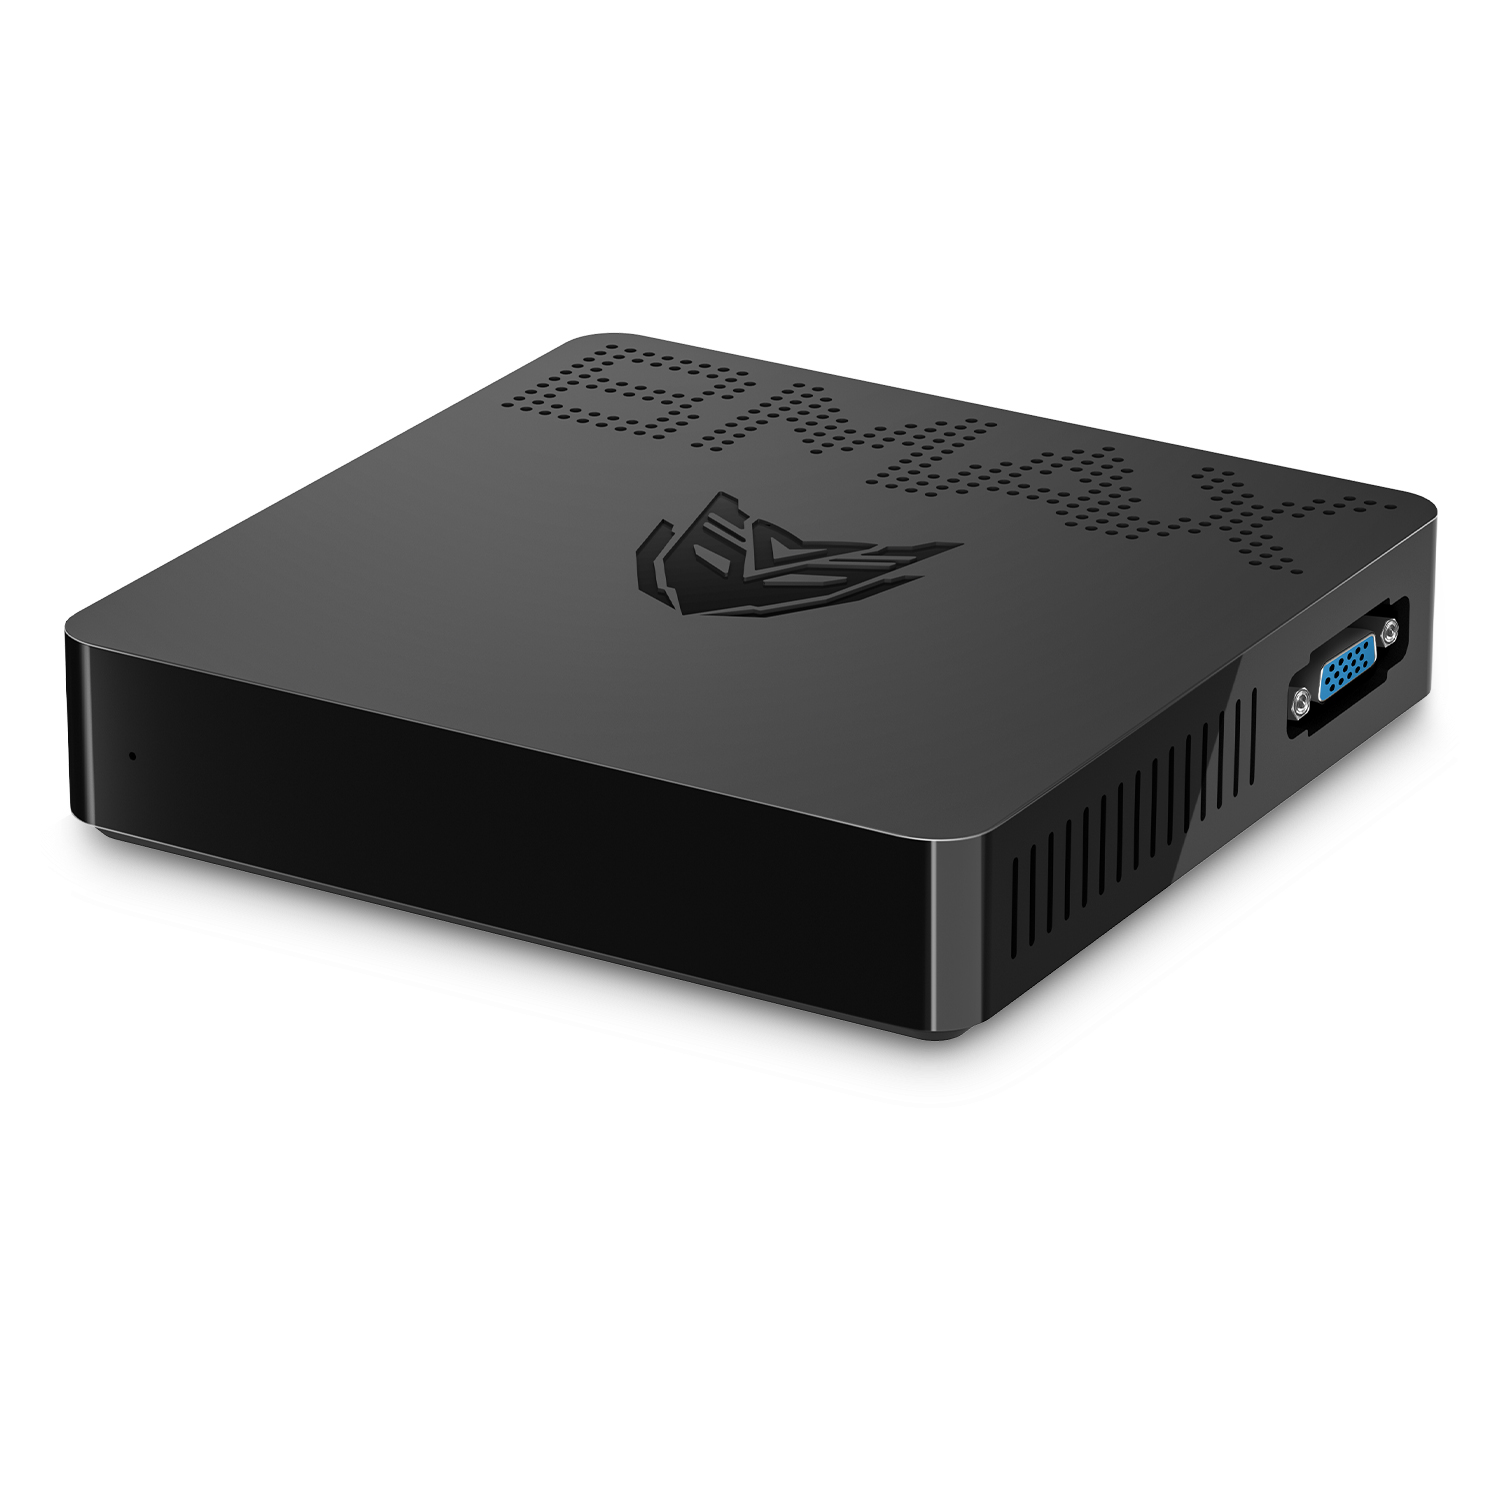 Find Bmax B1 Mini PC Intel Celeron J3060/N3060 Dual Core 1 6GHz up to 2 4GHz 4GB LPDDR3 64GB eMMC Intel HD Graphics Wifi bluetooth M 2 SATA 12V/2A HD VGA for Sale on Gipsybee.com with cryptocurrencies